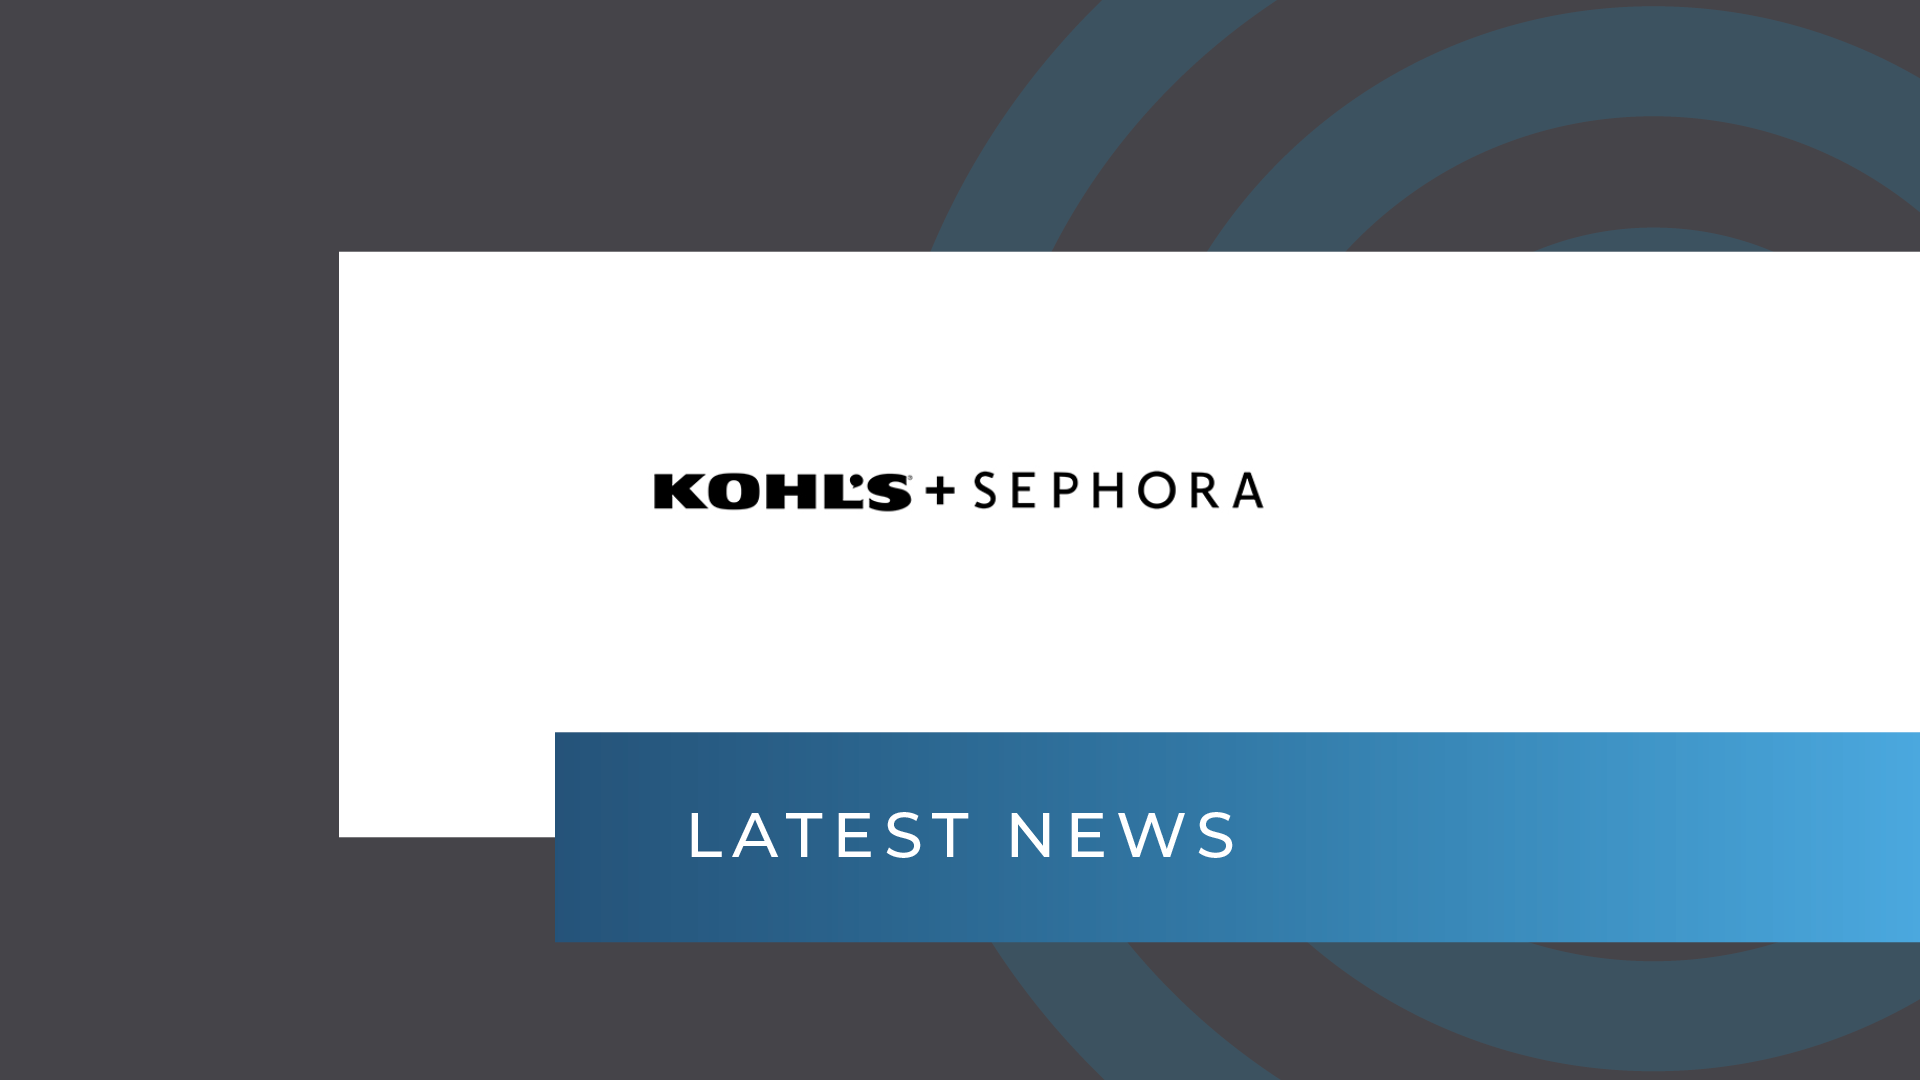 Full-size Sephora store to open in Kohl's in 2023